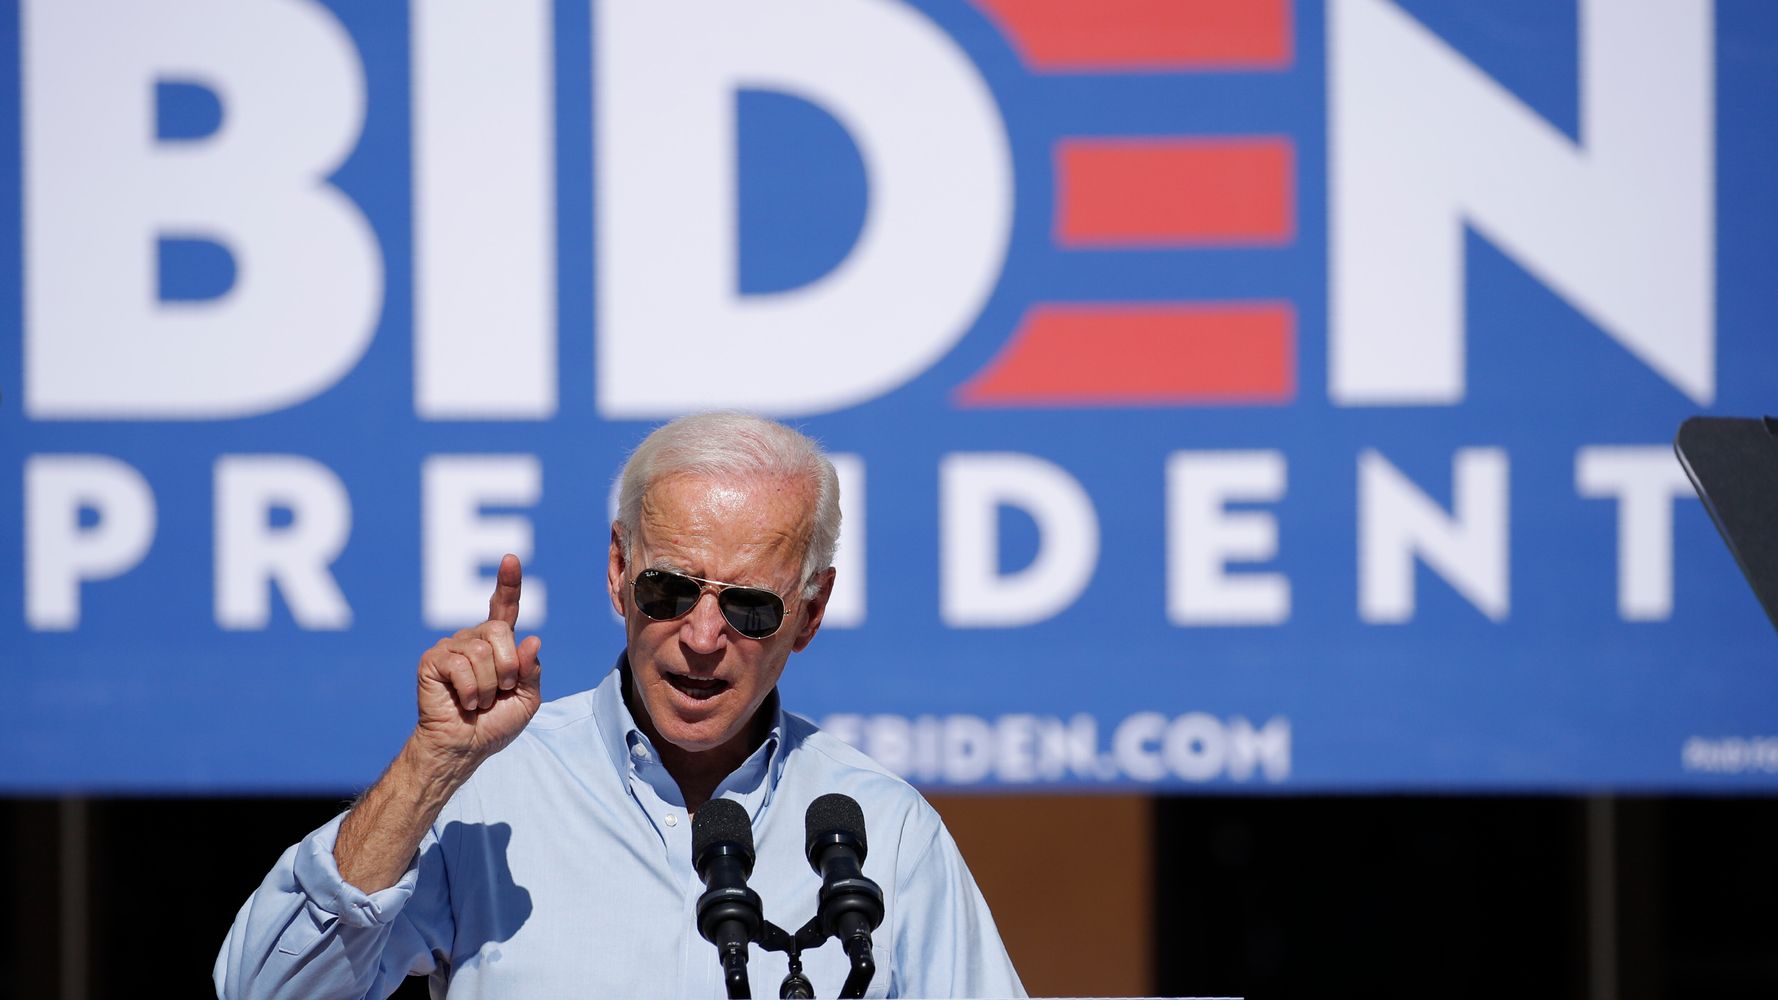 Biden Campaign Urges TV News Outlets To Get Rudy Giuliani Off The Air